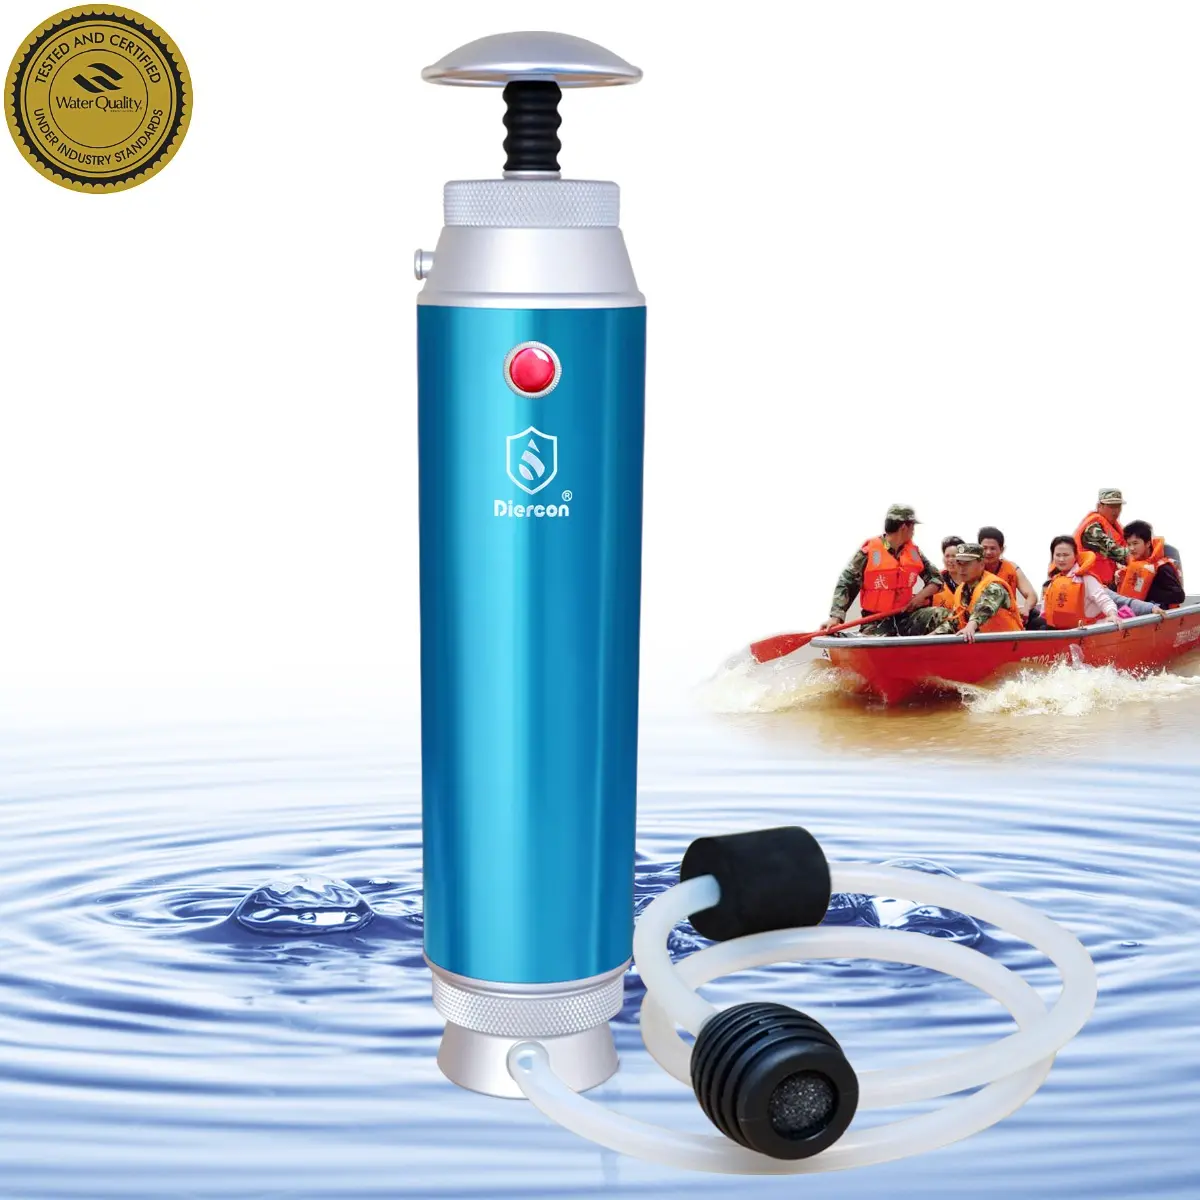 Diercon Hot sales Personal Water Filter The Portable Water Purifier equipment for Camping Travel Hiking Survive (KP02)